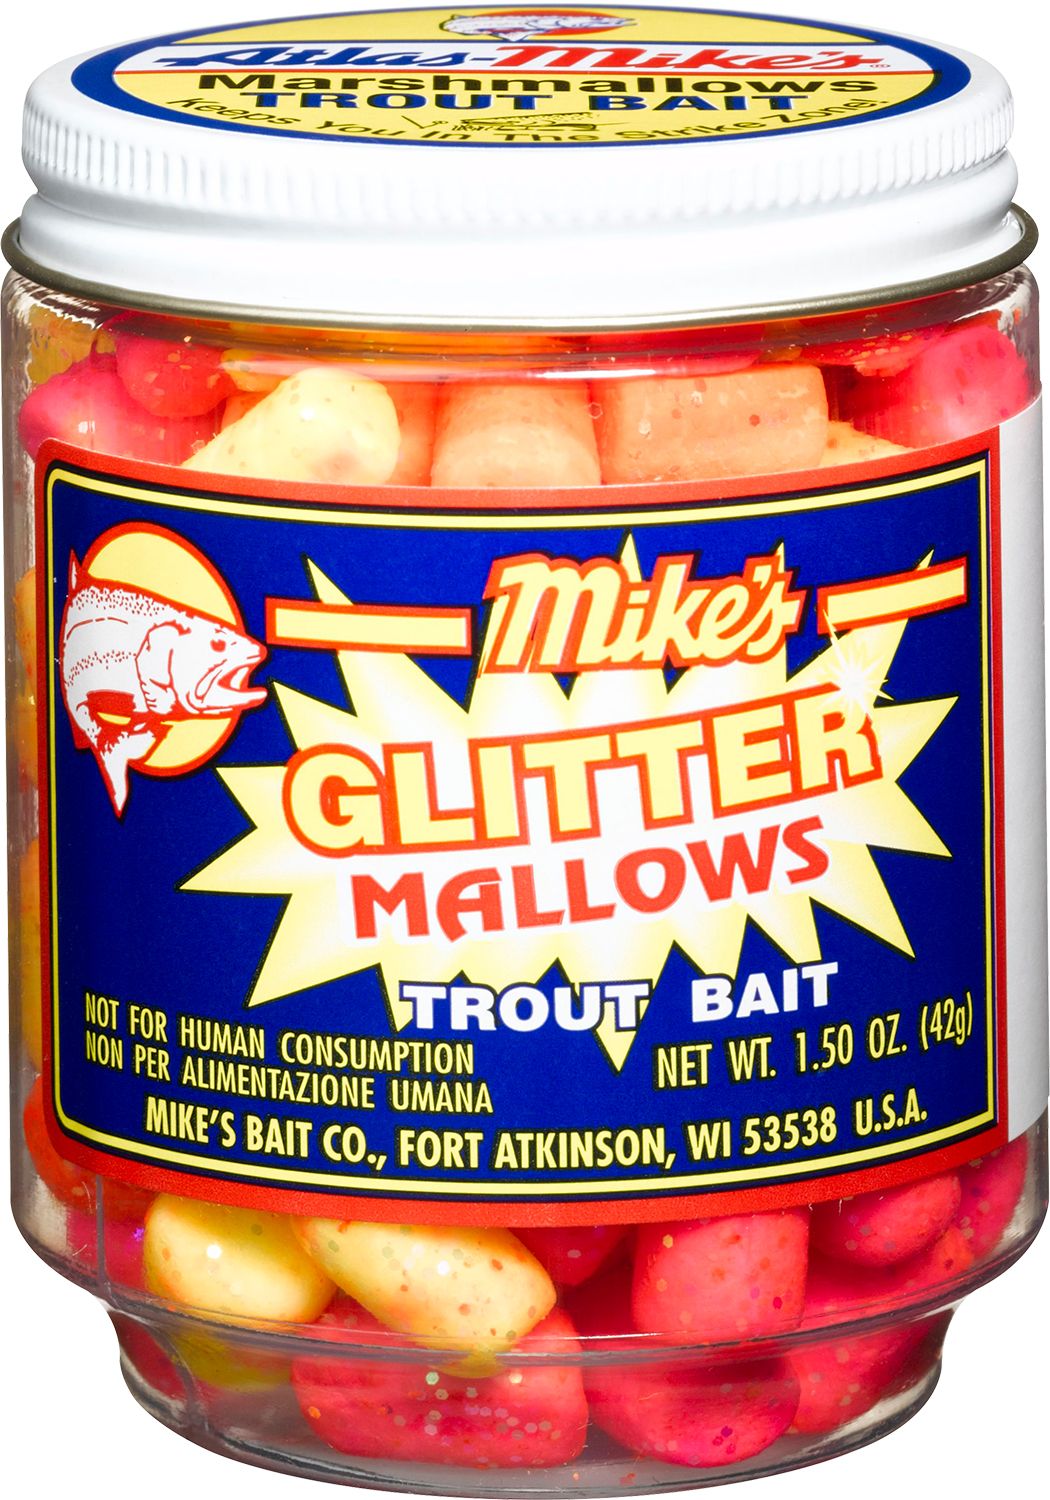 Mike's Glitter Mallows Trout Bait